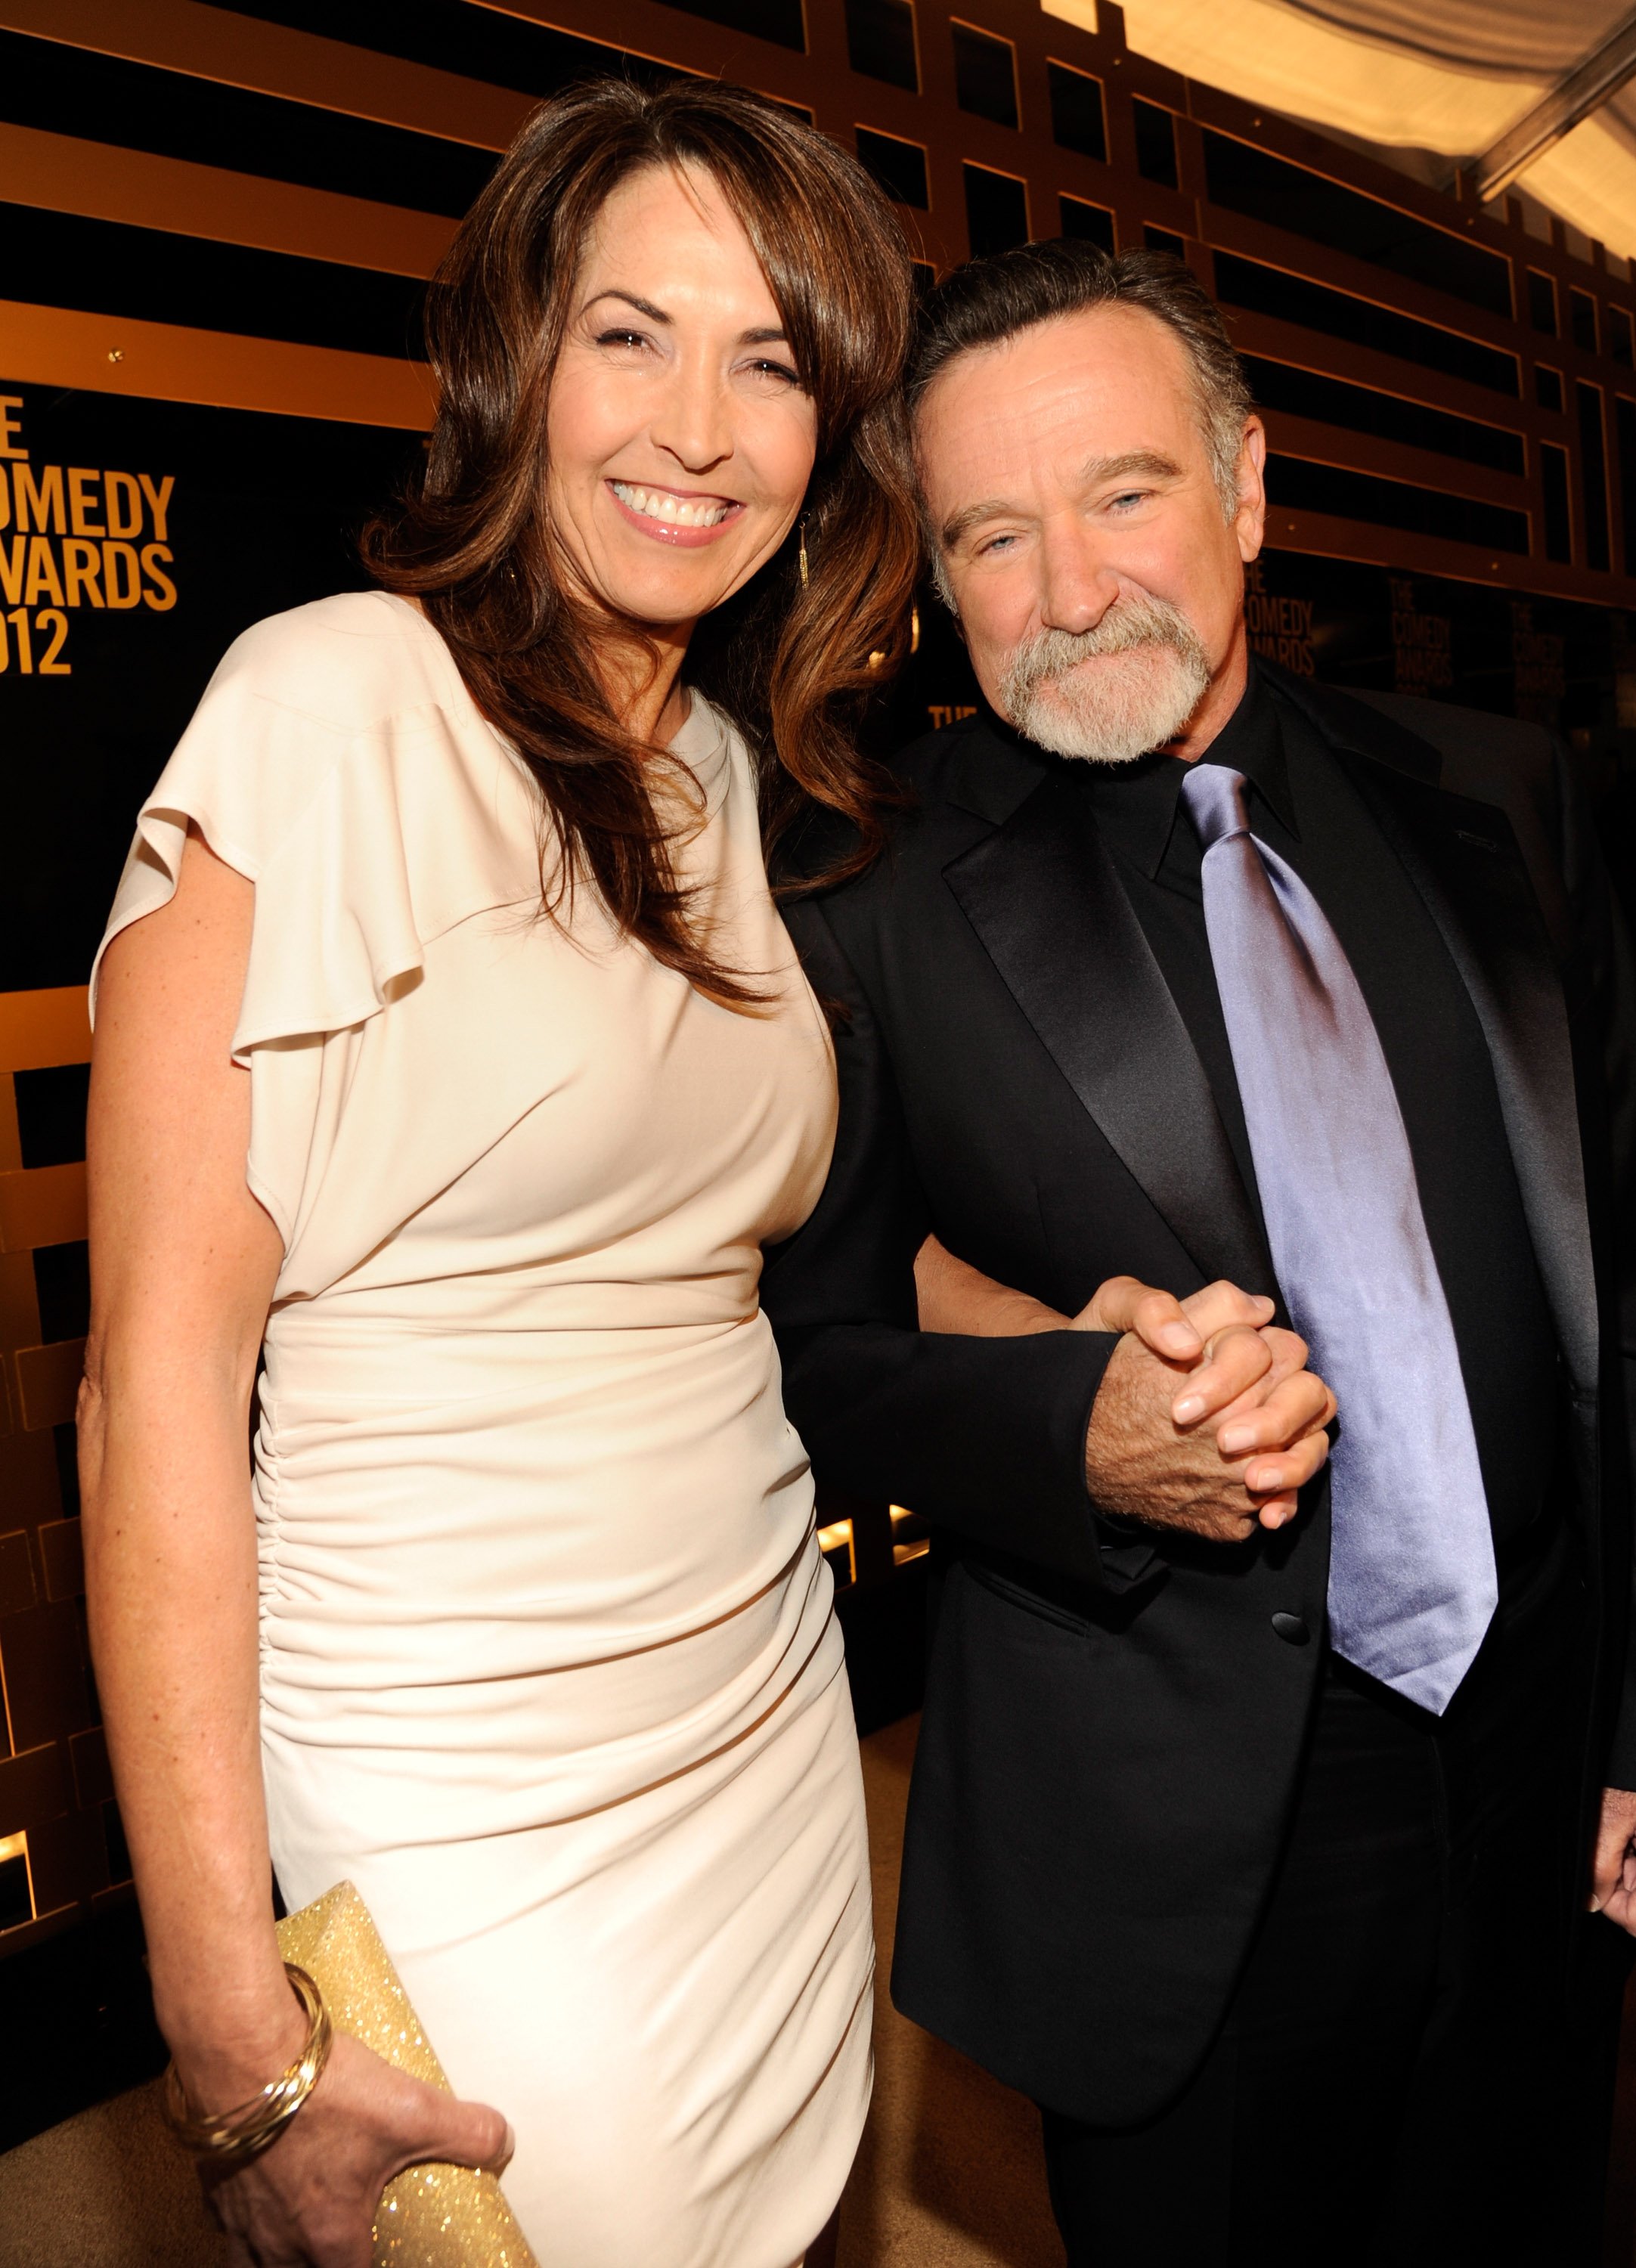 Graphic designer Susan Schneider and Robin Williams attend The Comedy Awards 2012 at Hammerstein Ballroom on April 28, 2012 in New York City ┃Source: Getty Images